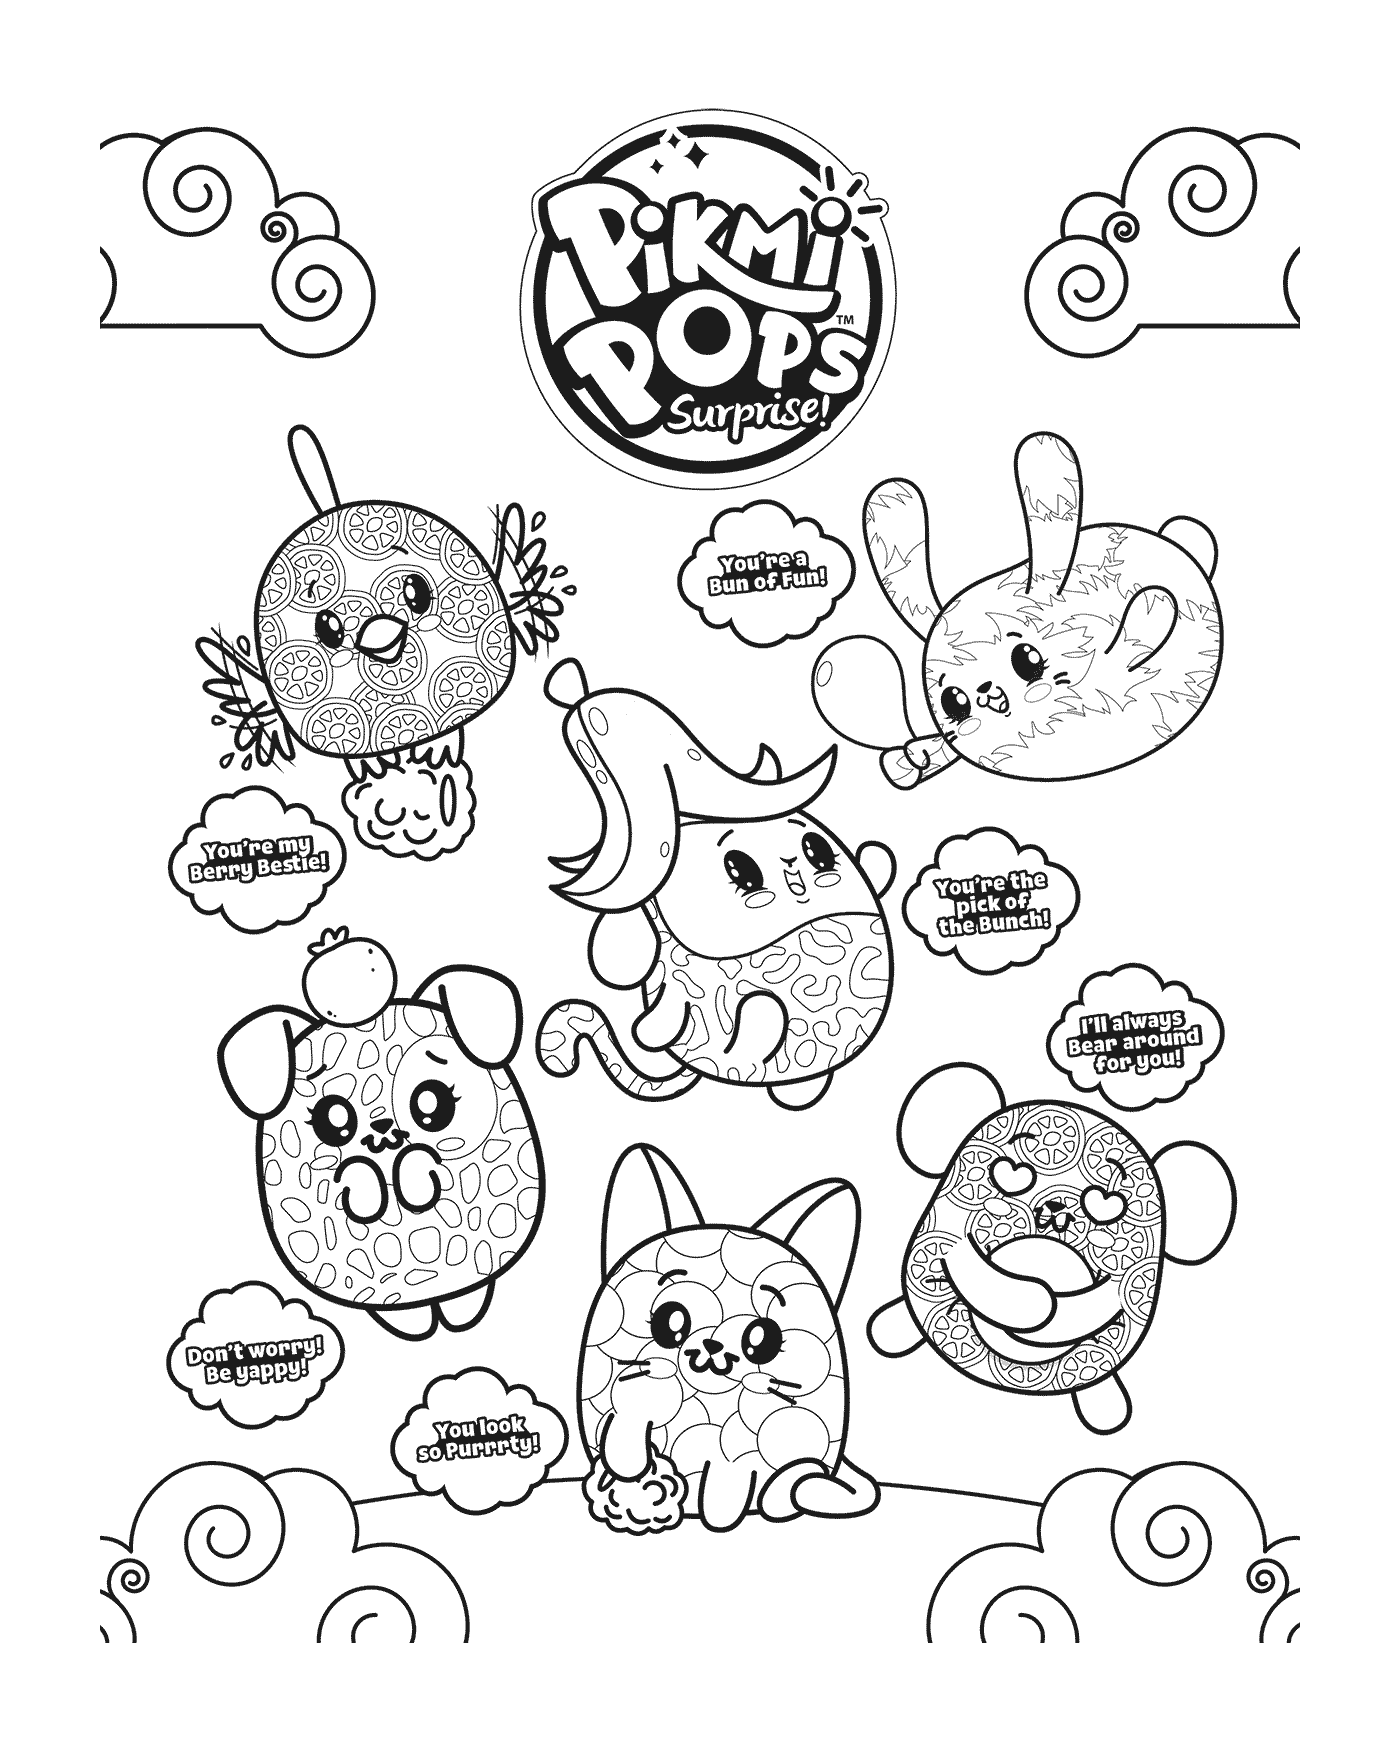  Assortment of Pikmi Pops characters 